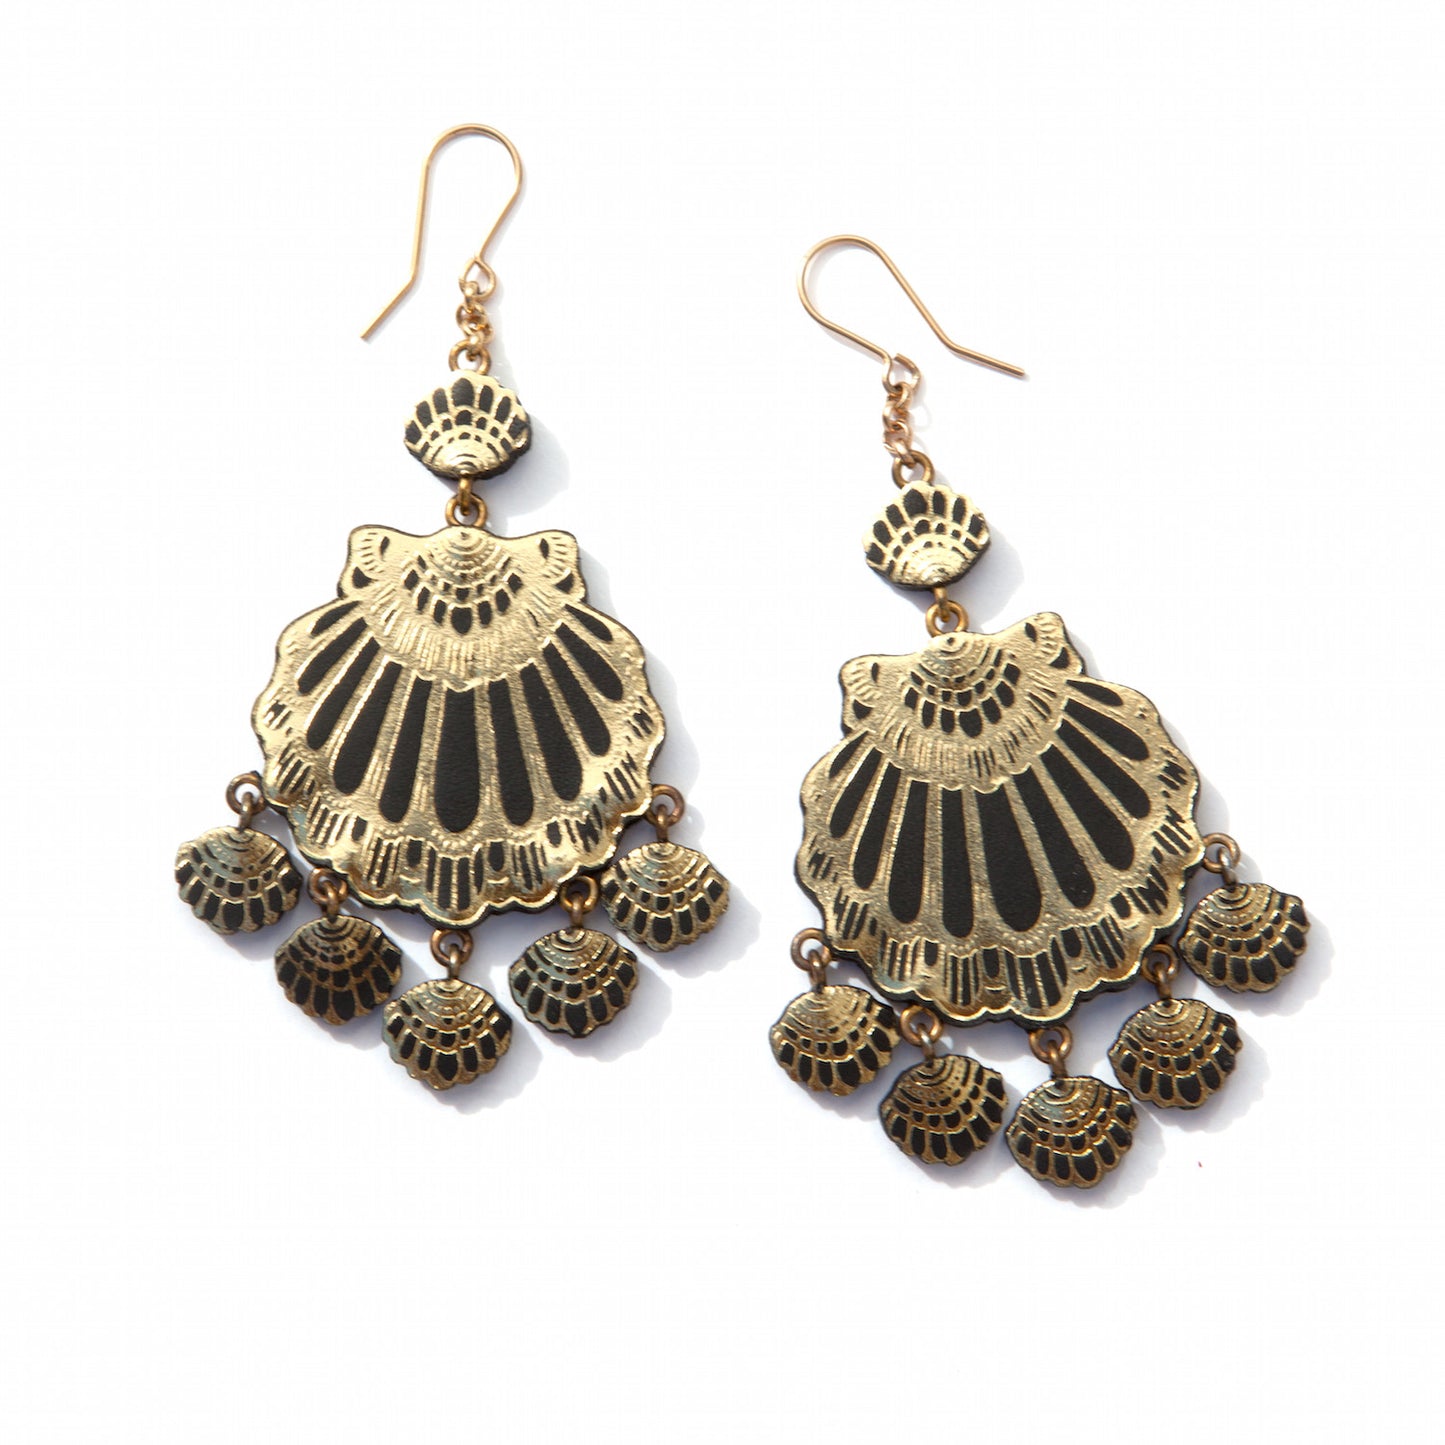 seashell chandelier earrings in black leather with gold printed detail.